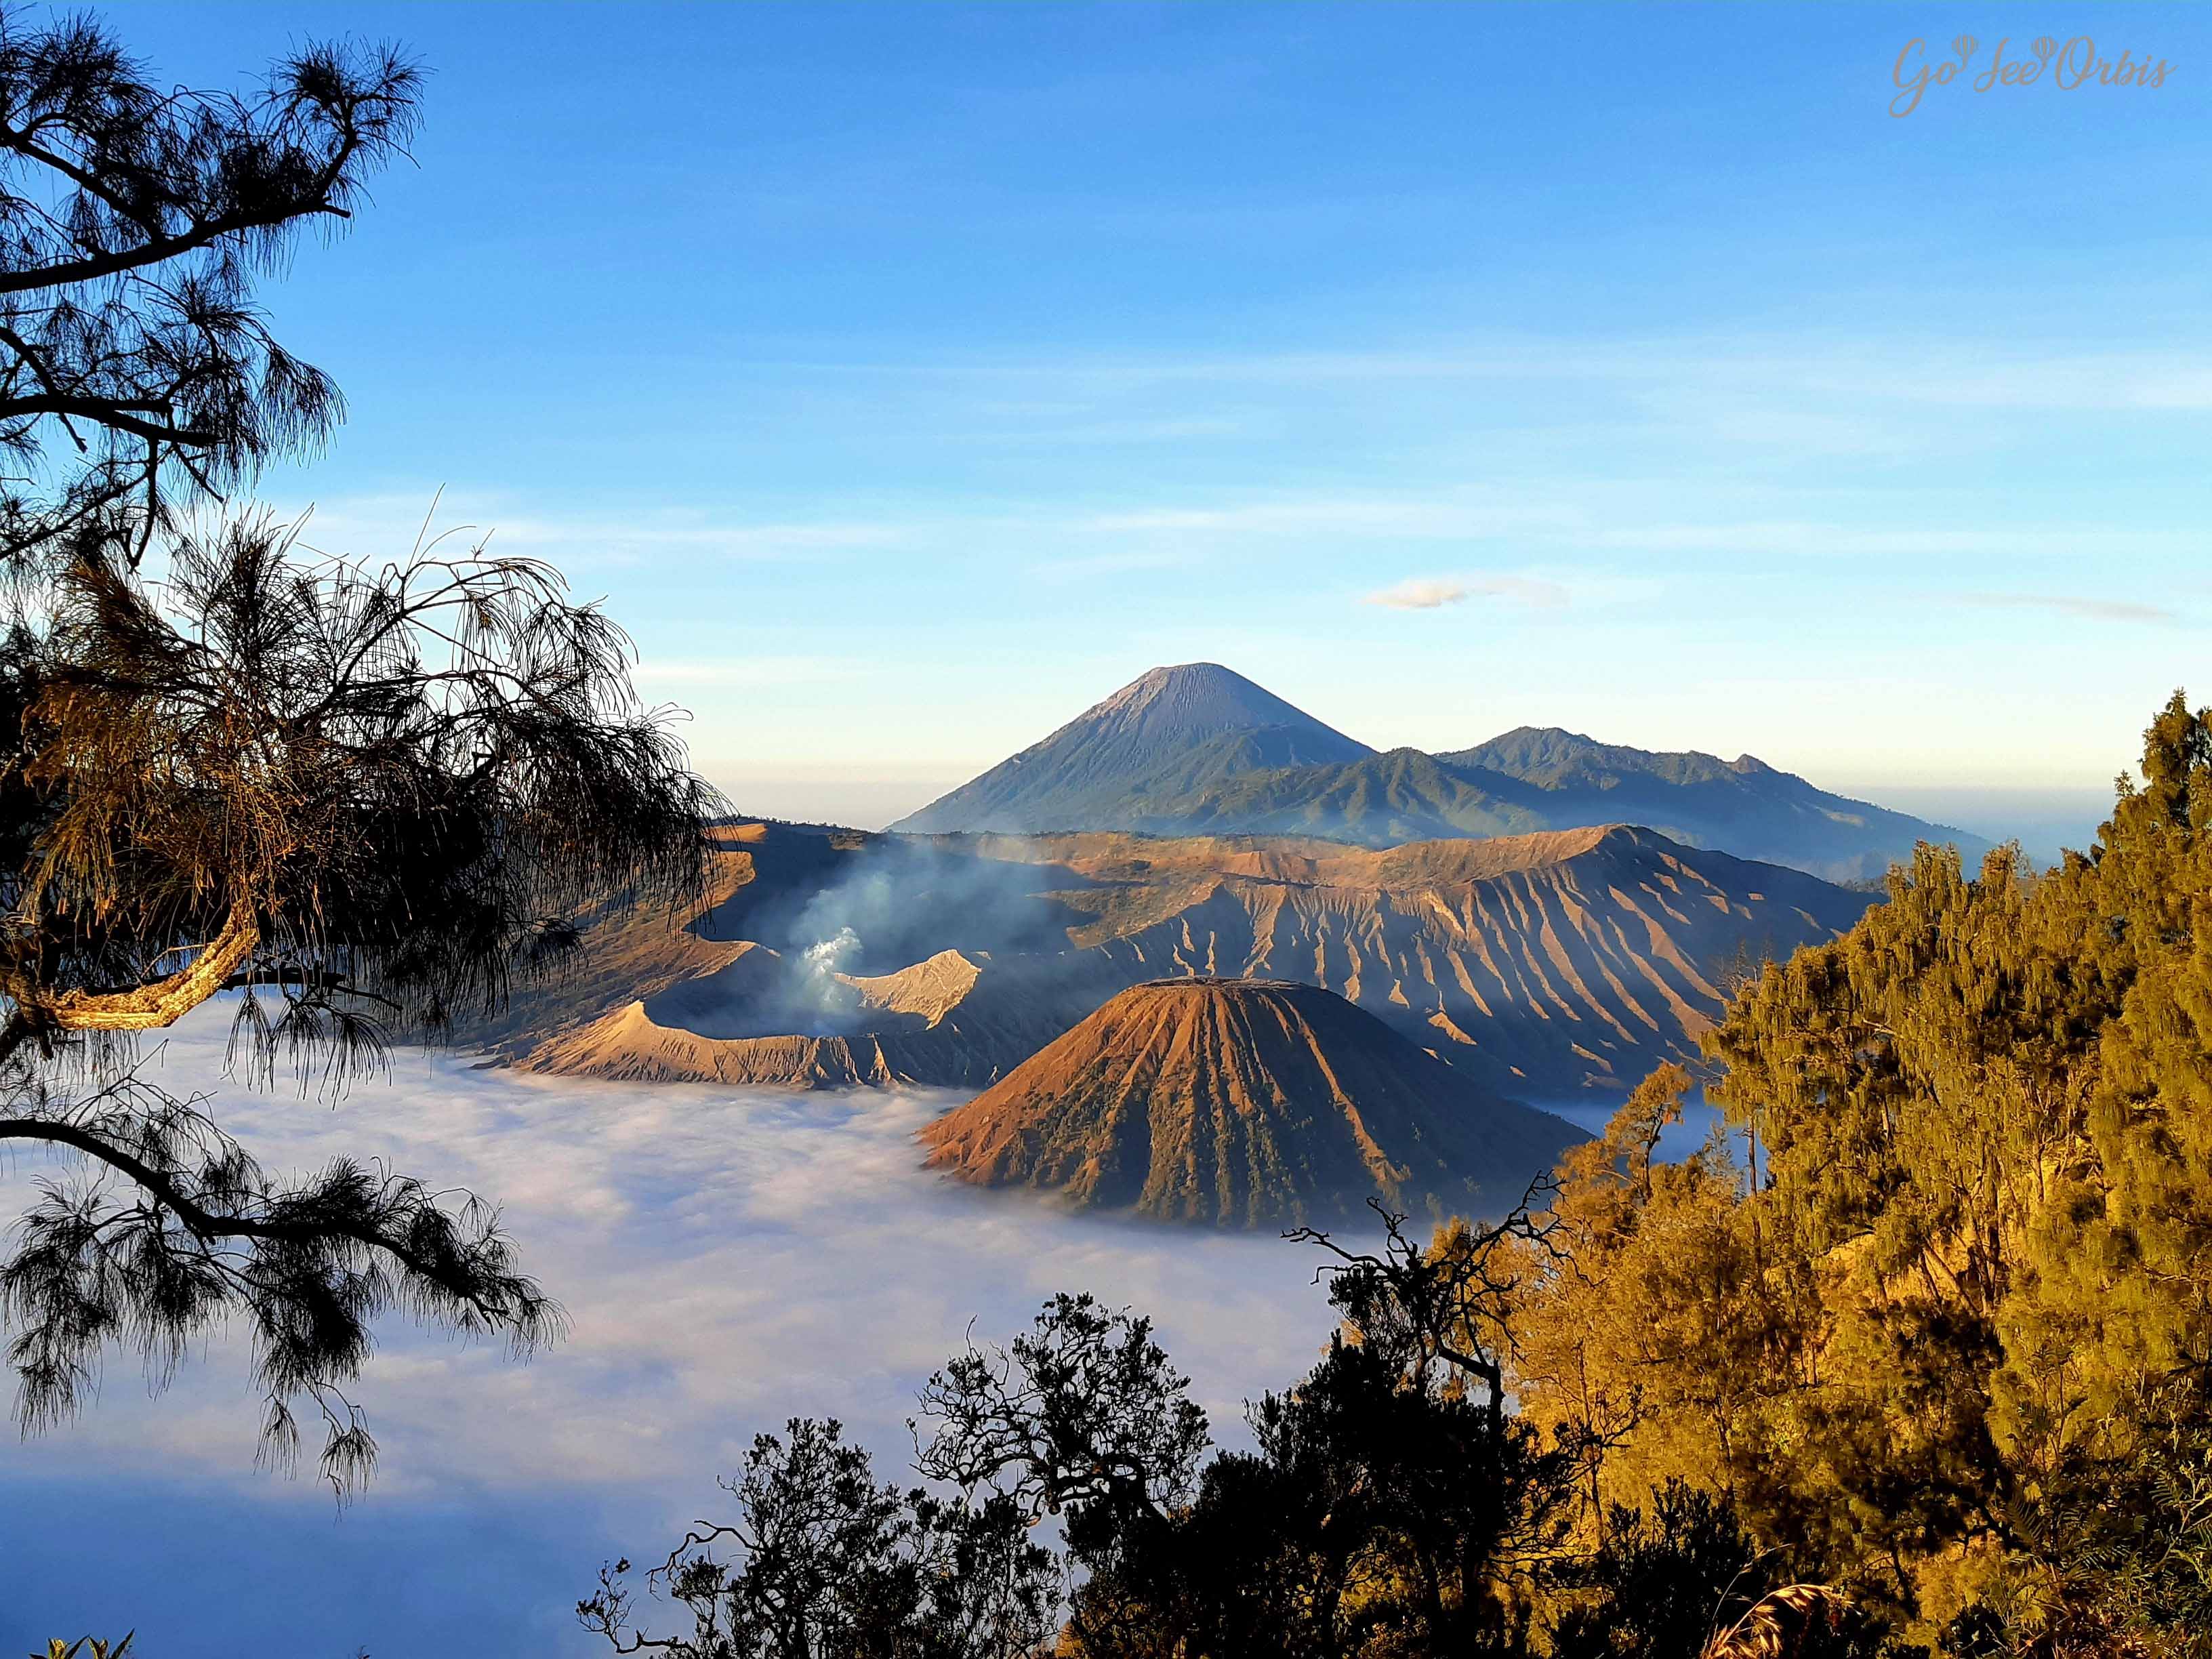 An aerial view of Mount Bromo with some parts covered in clouds